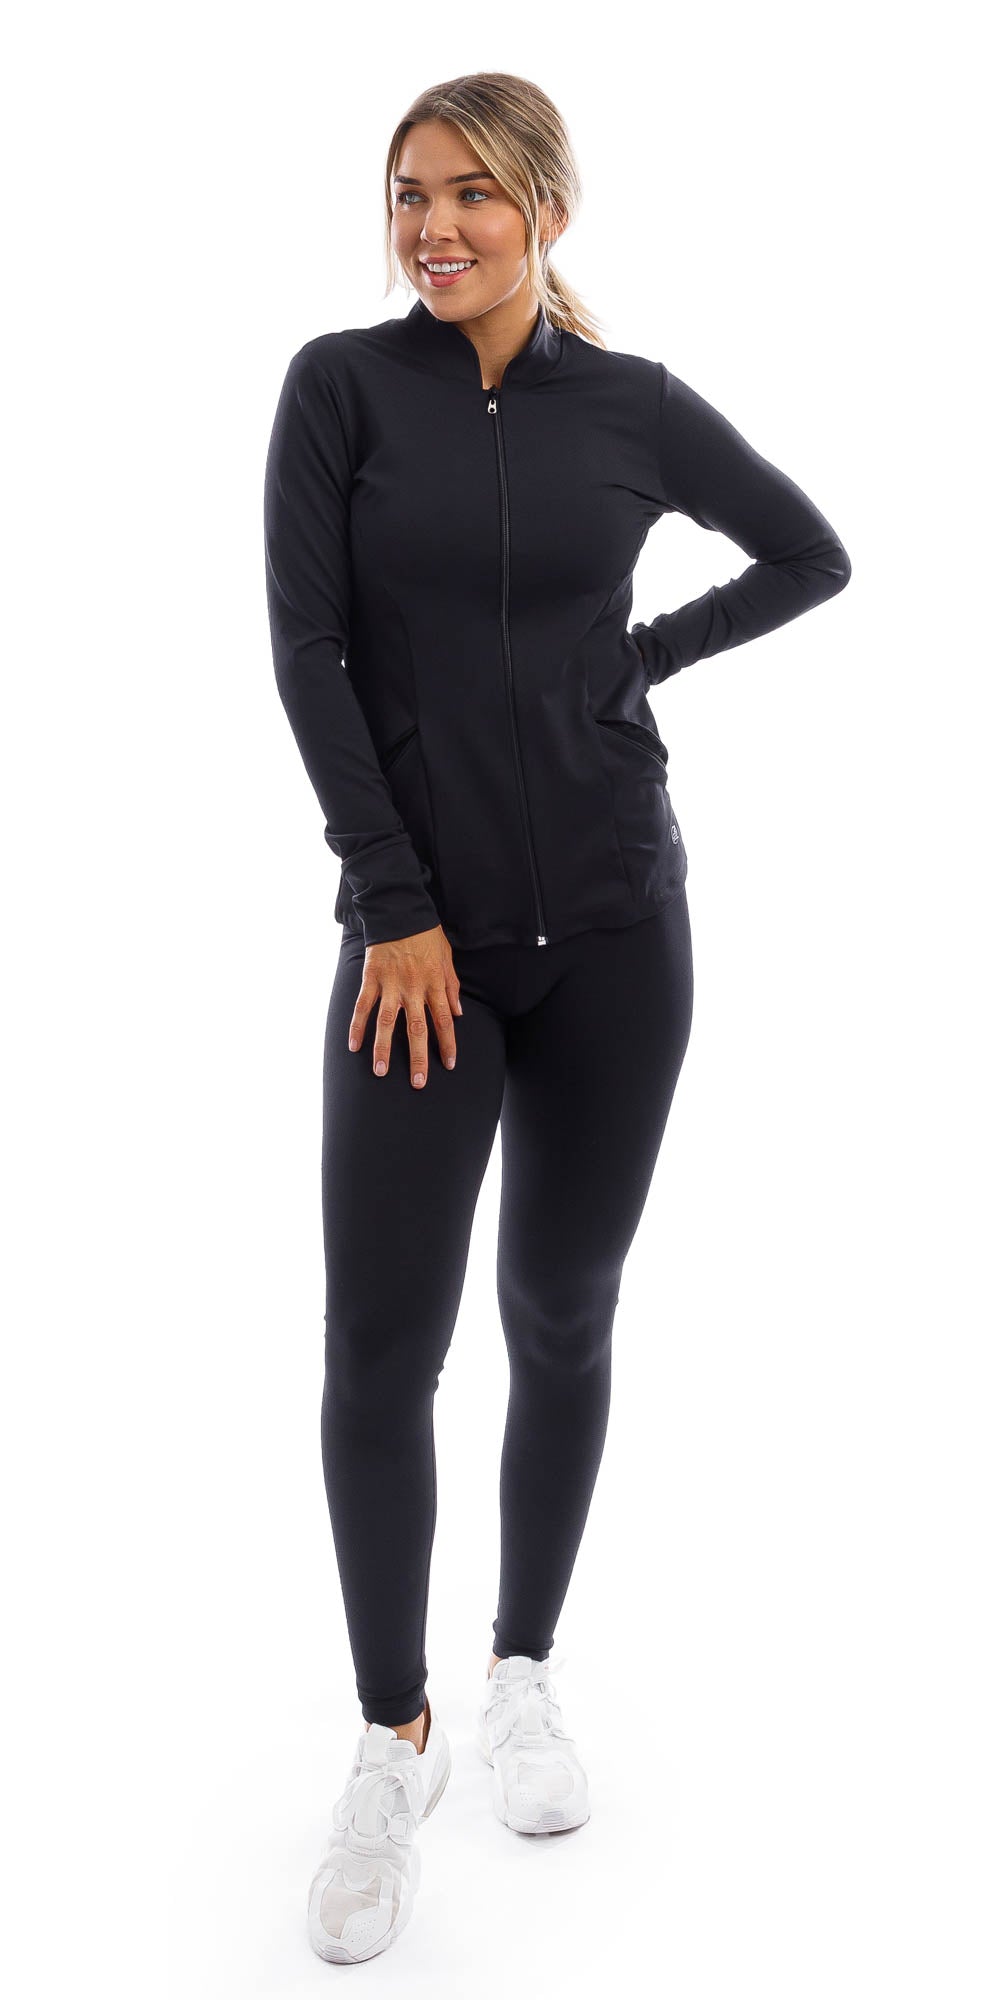 Girl standing in black midnight endurance jacket with zip and thumb pockets & midnight leggings